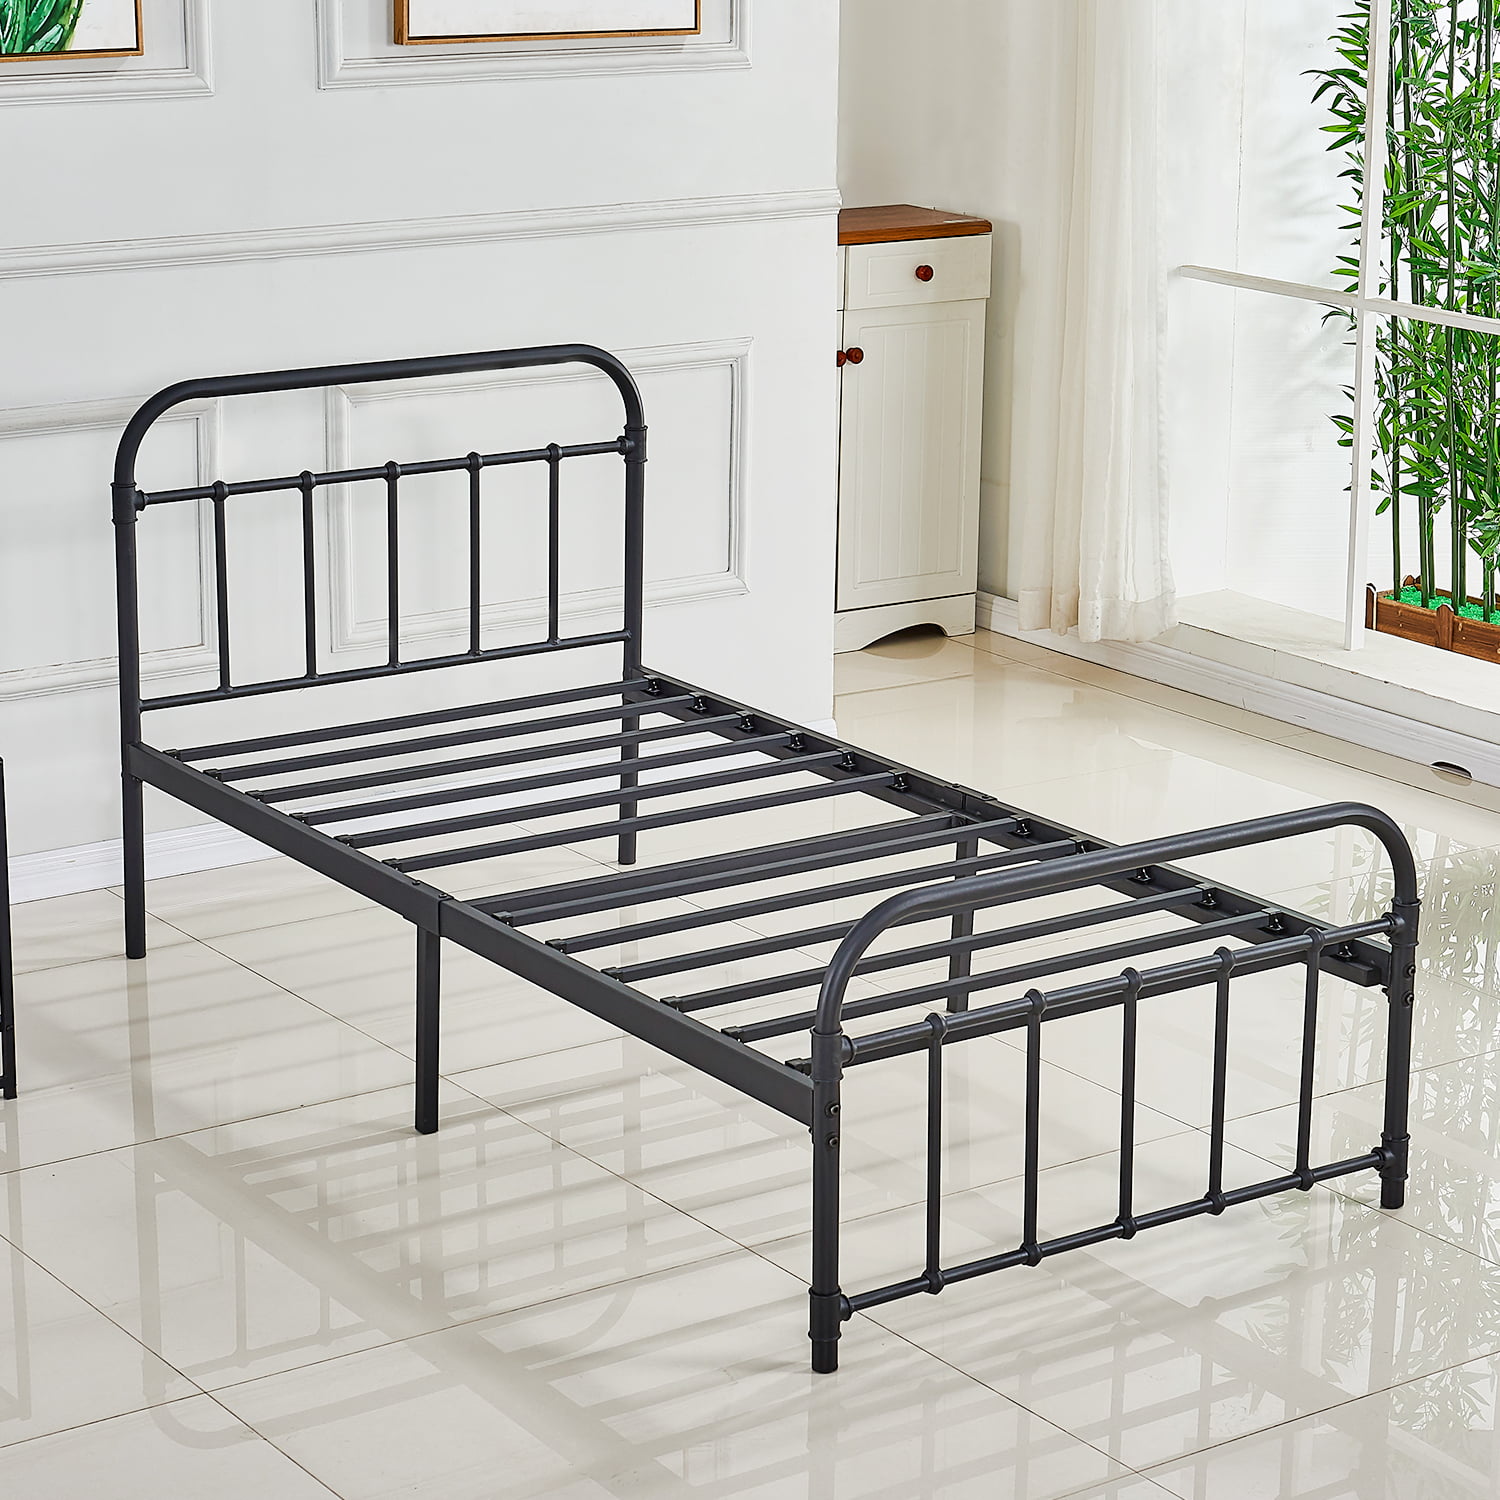 Dikapa Twin Size Bed Frame Base Metal, Twin Bed And Bed Frame